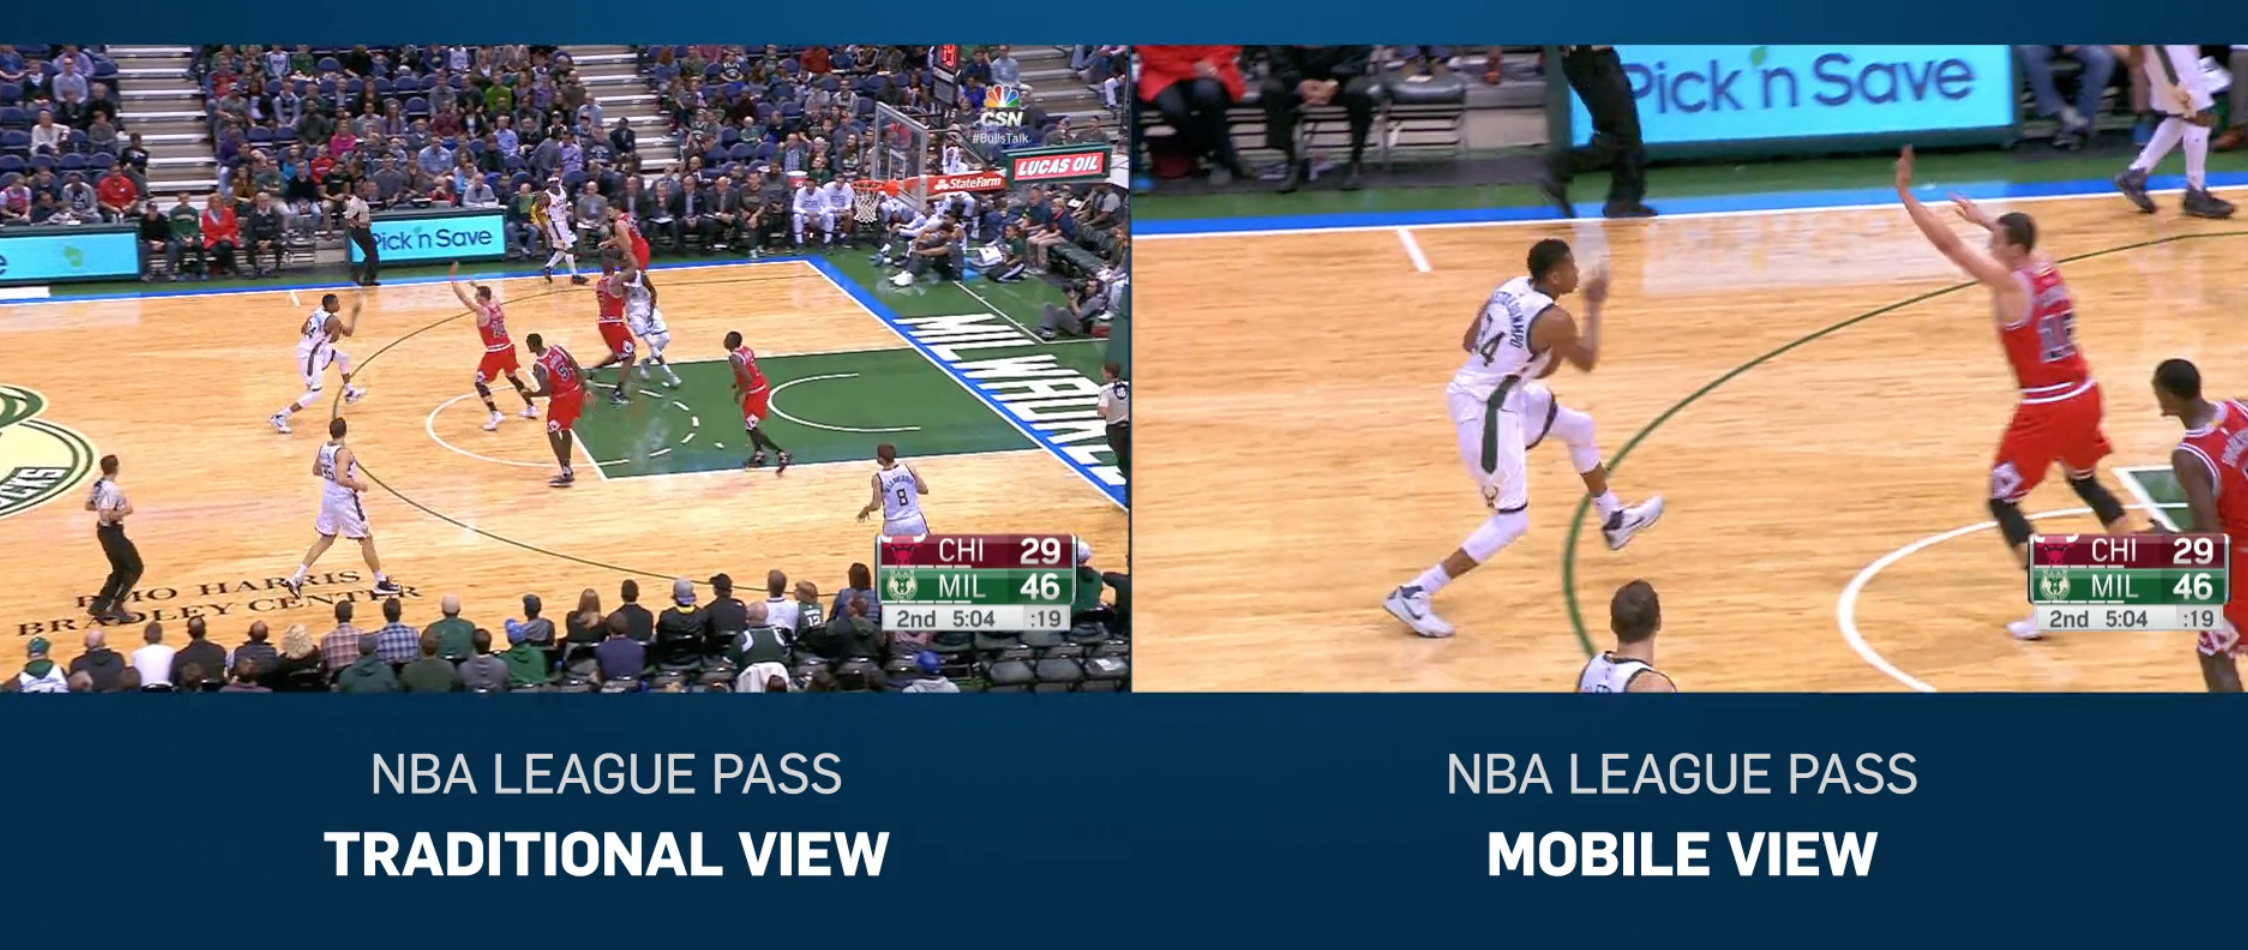 NBA League Pass is launching Mobile View to make it more ...